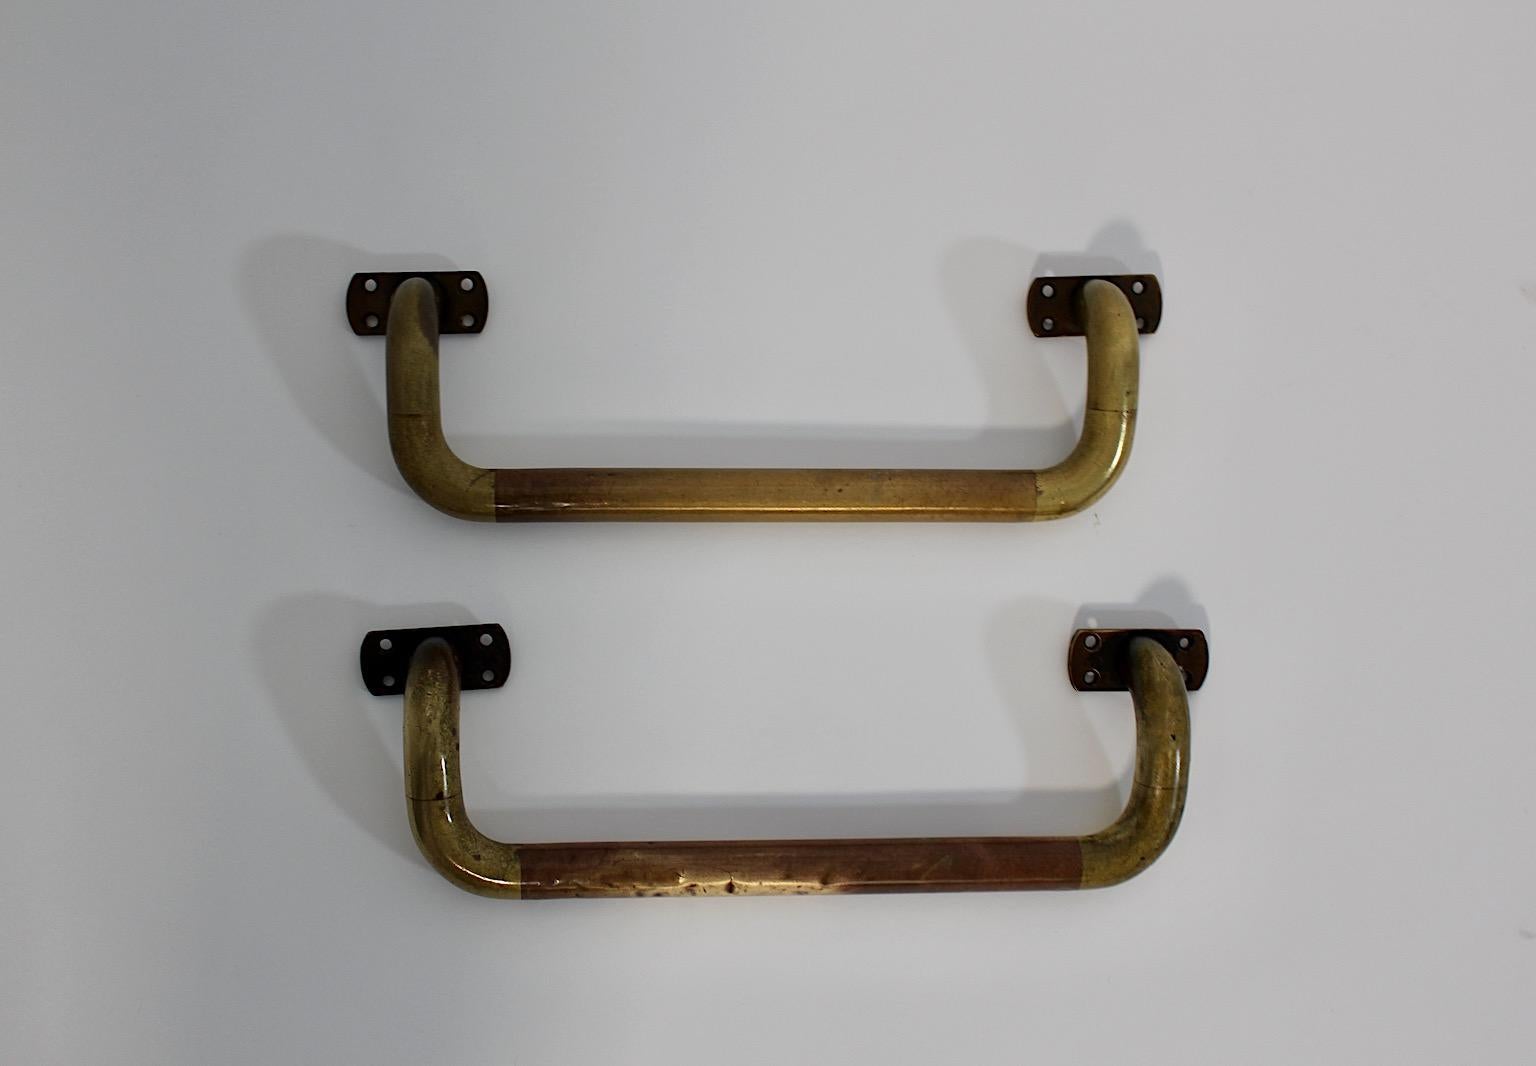 Art Deco vintage pair duo handles or towel racks or towel rails from solid brass Austria 1930s.
A wonderful pair or duo of handles from solid brass manufactured 1930s characterized through desirable patina features with simpleness and clear